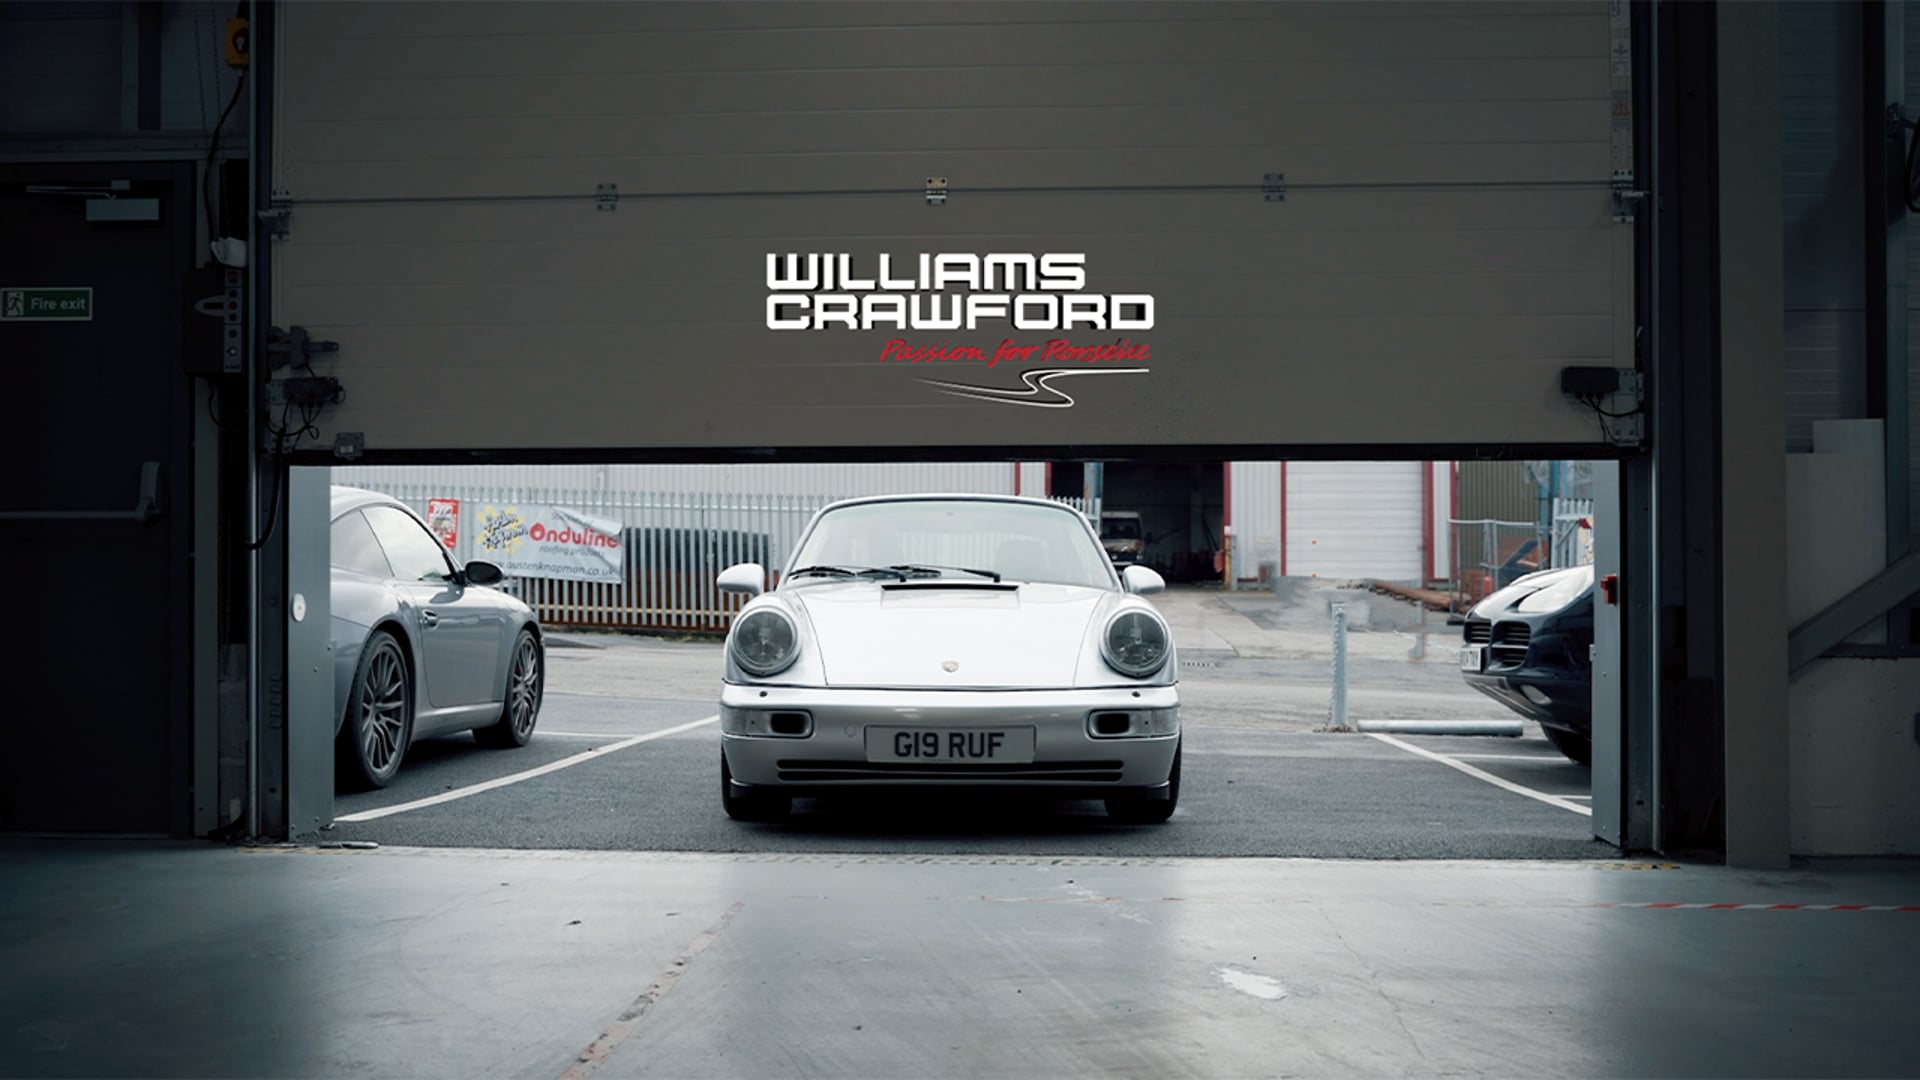 Williams Crawford Passion For Porsche - Promotional Video